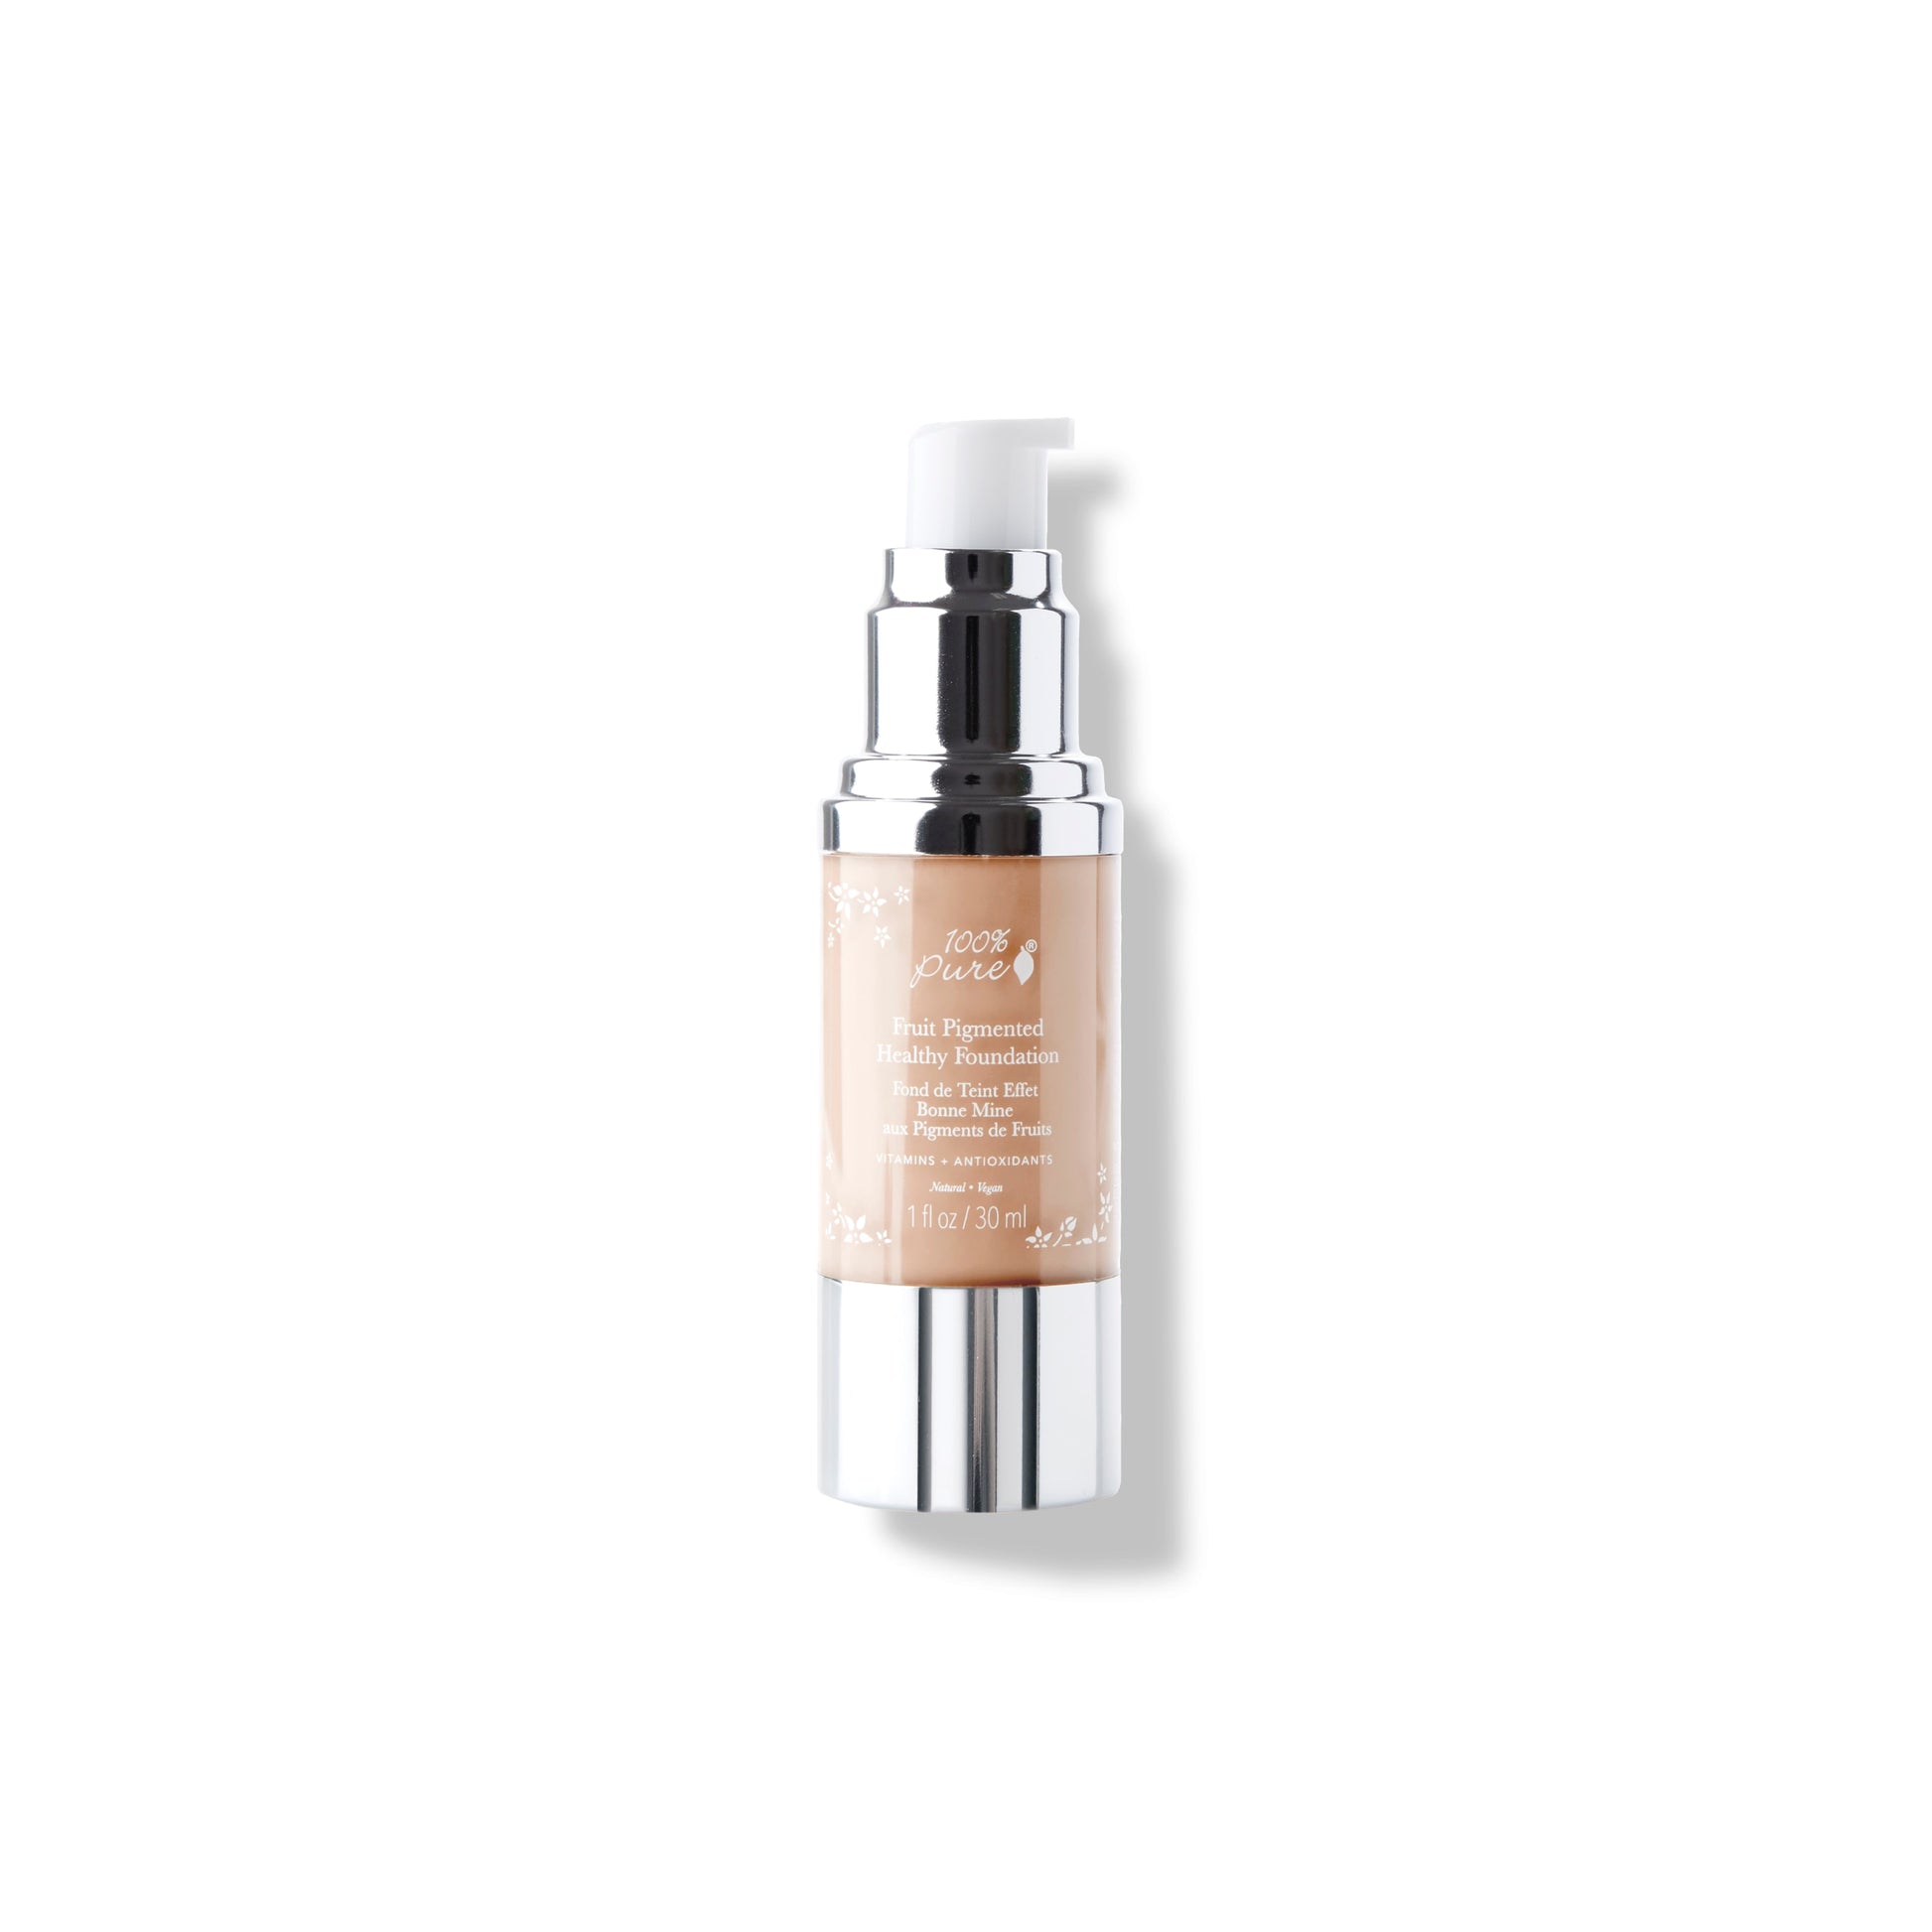 100% PURE Fruit Pigmented Healthy Foundation sand